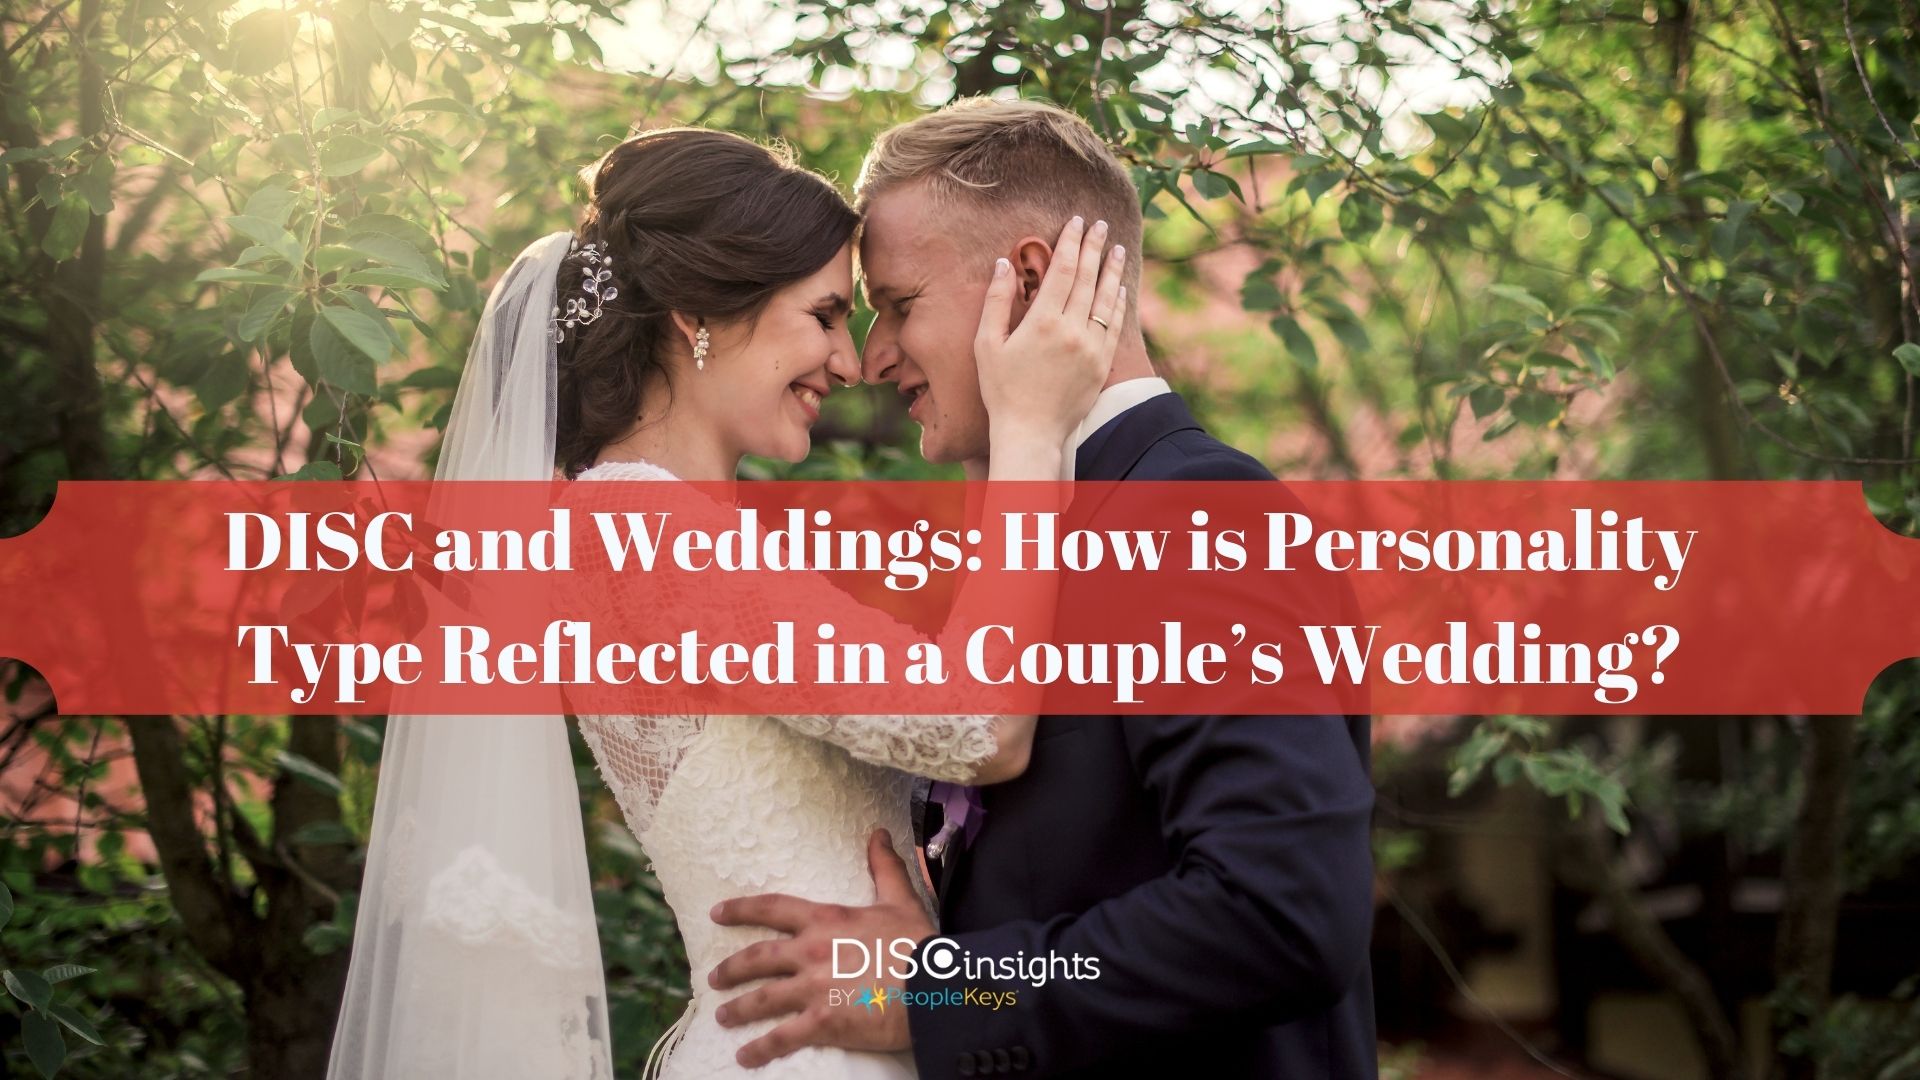 DISC and Weddings: How is personality type reflected in a couple’s wedding?